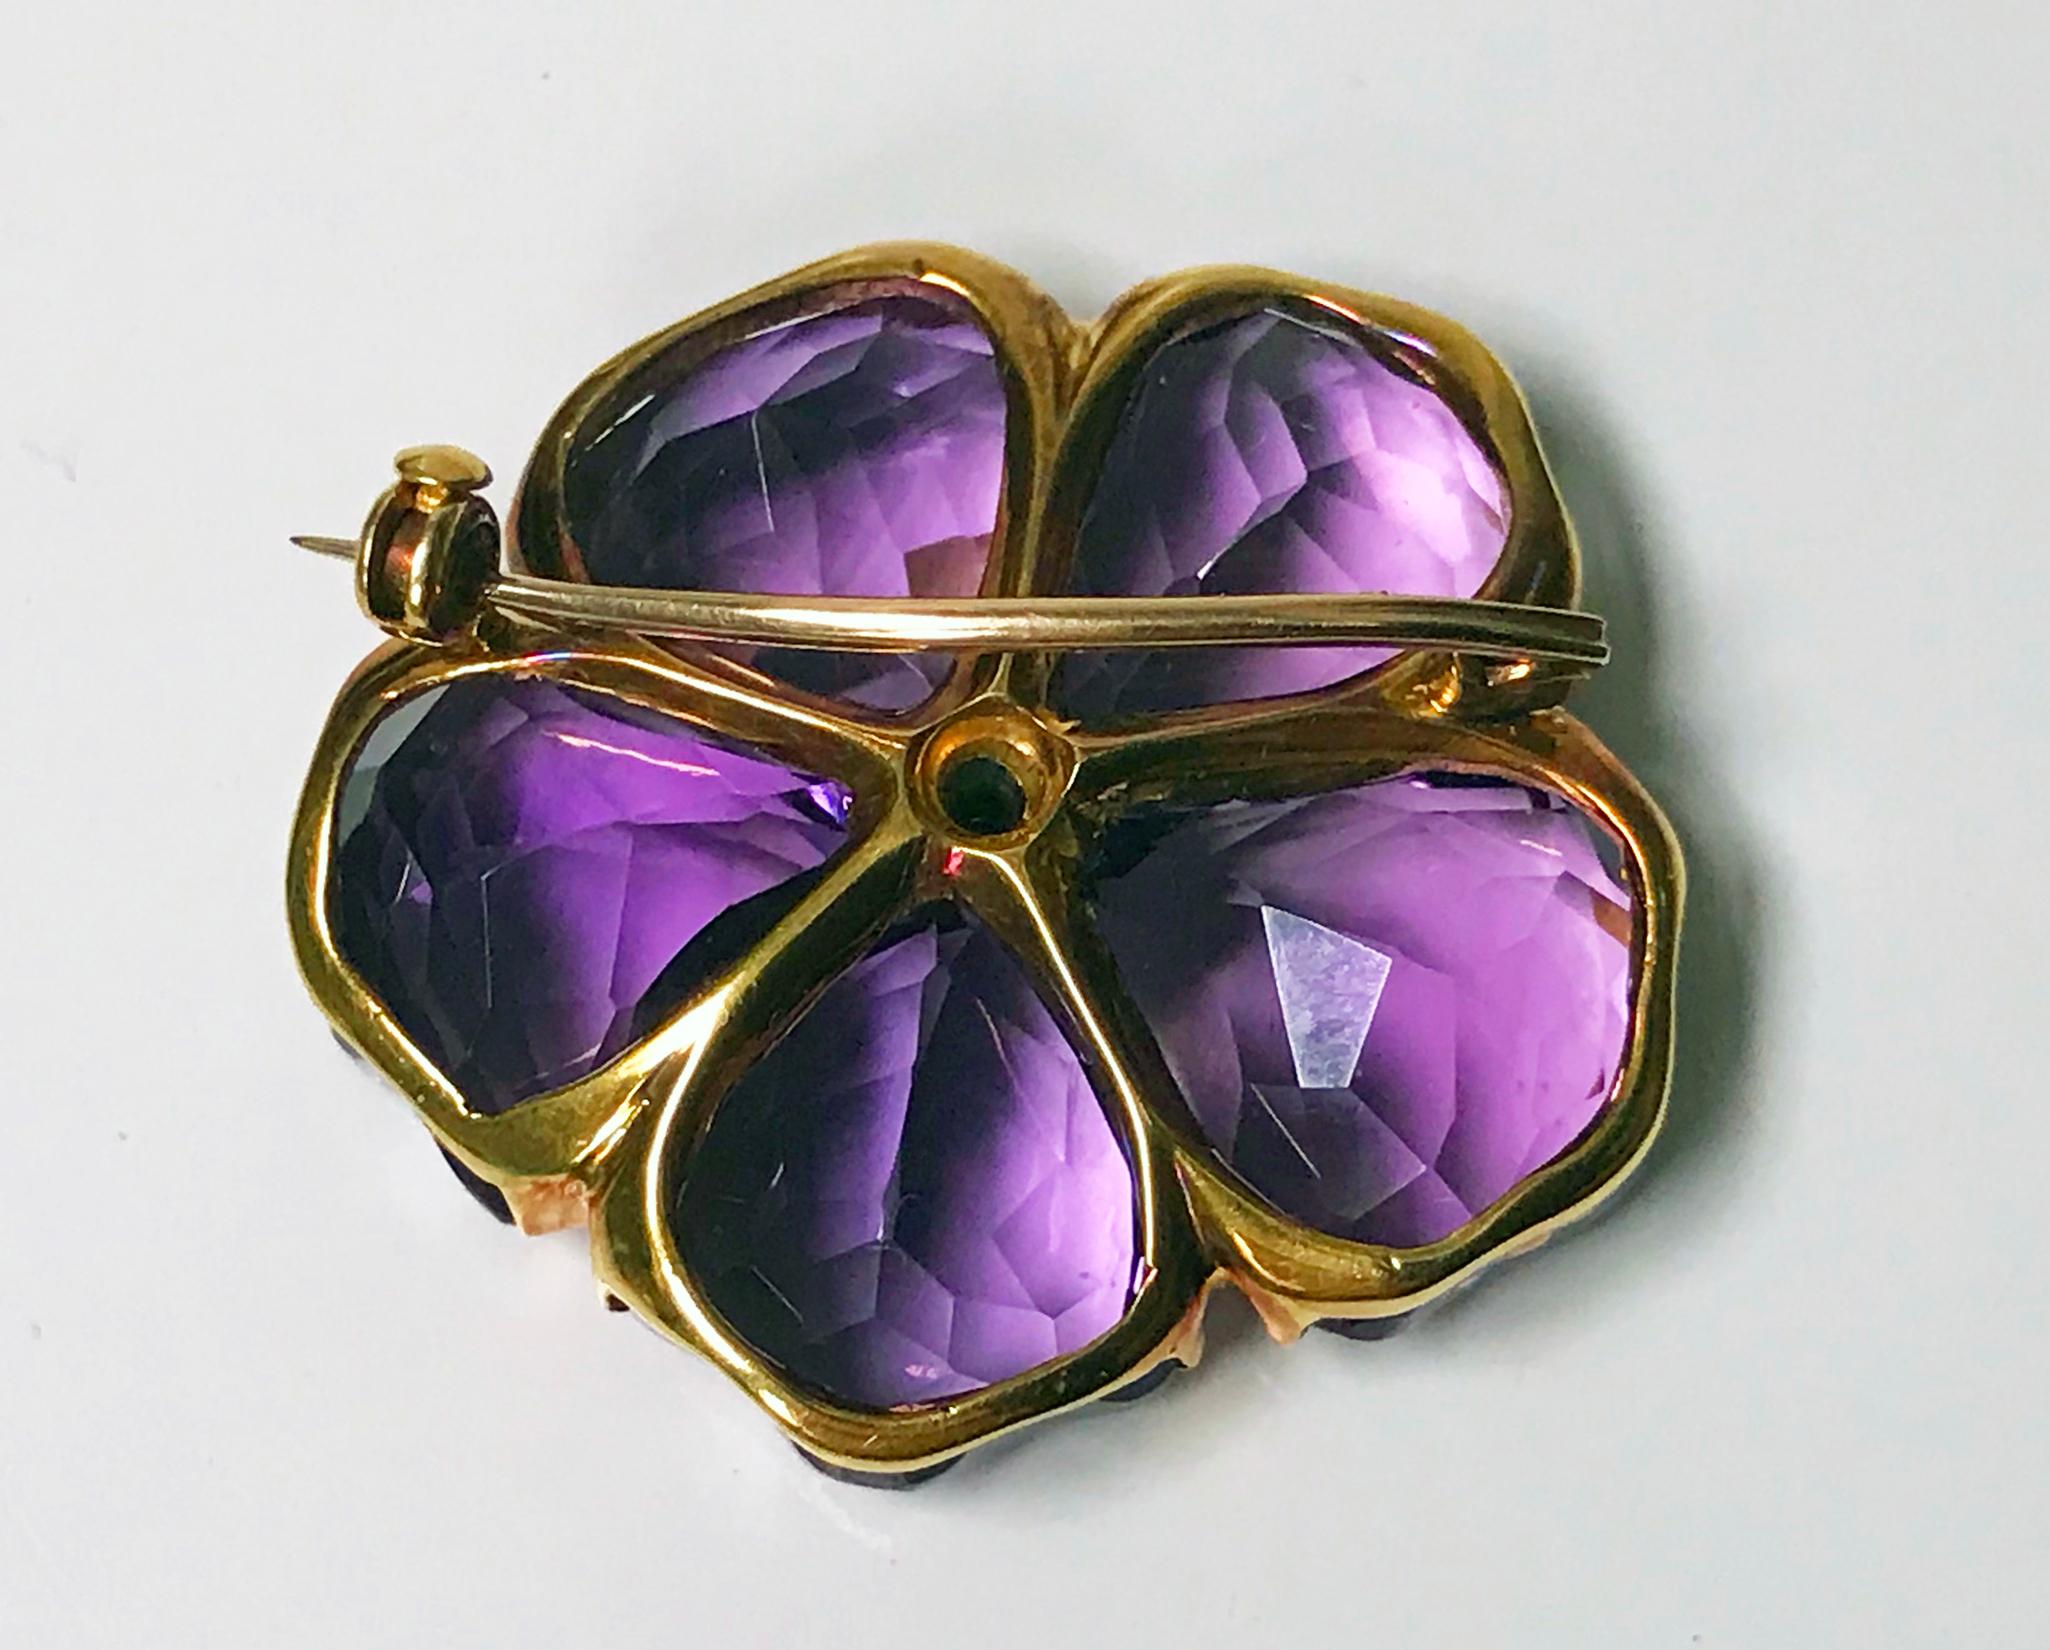 Fine Amethyst and Diamond Pansy Brooch 18K C. 1900.  The brooch of carved amethyst petals with an early european cut diamond stamen, all mounted in 18K, safety catch to pin at reverse. Diameter: 3.00 cm. Item Weight: 12.55 grams. Amethyst well